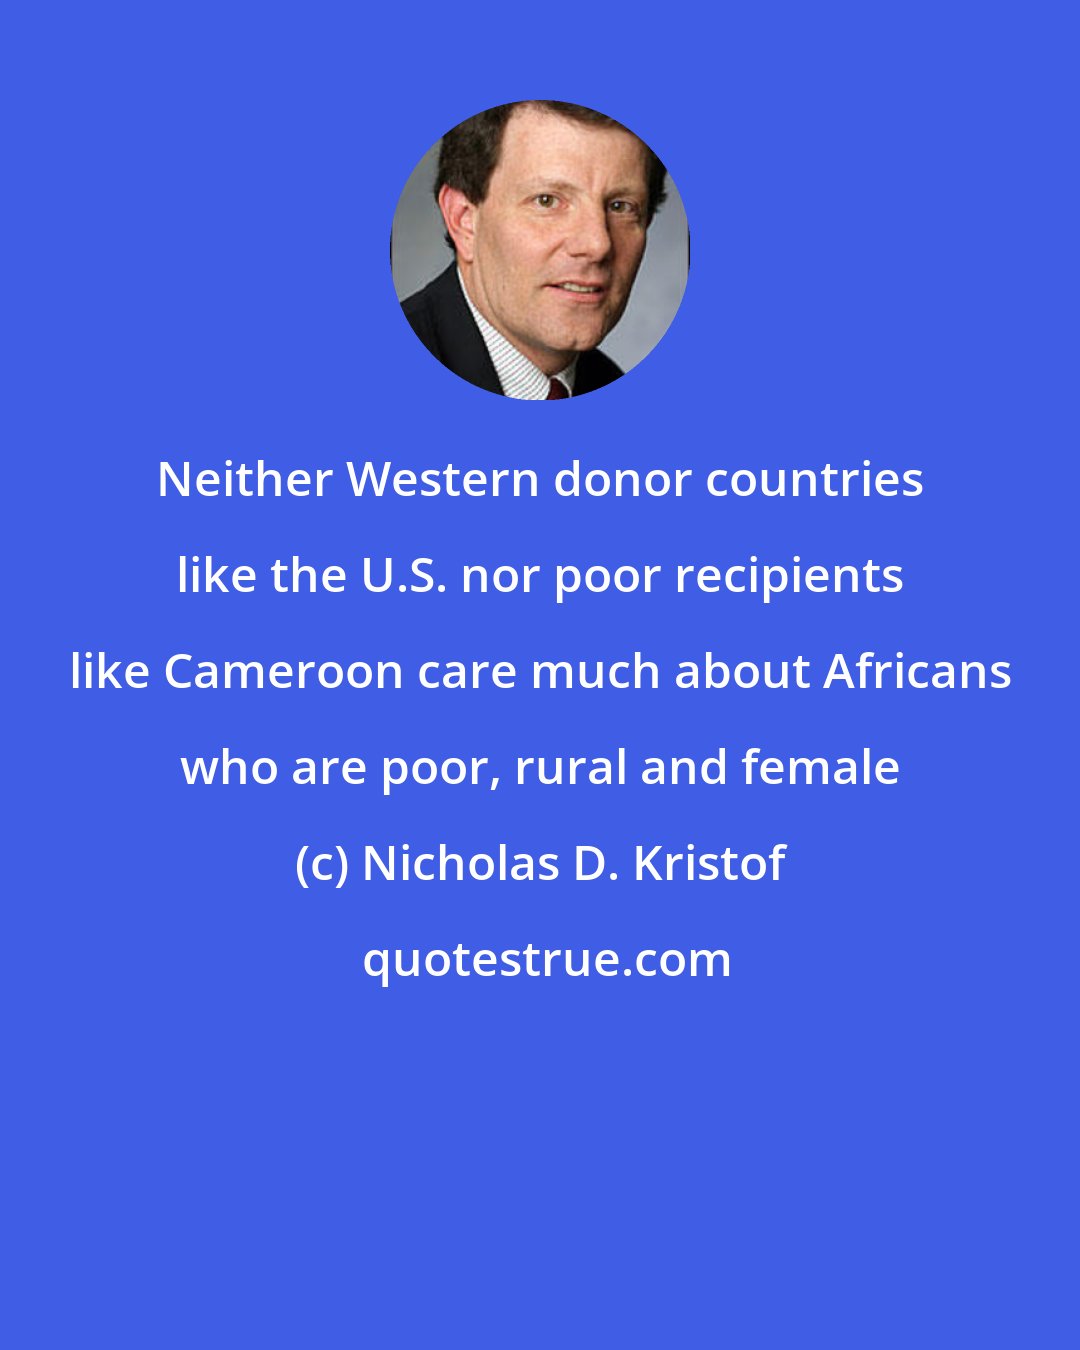 Nicholas D. Kristof: Neither Western donor countries like the U.S. nor poor recipients like Cameroon care much about Africans who are poor, rural and female